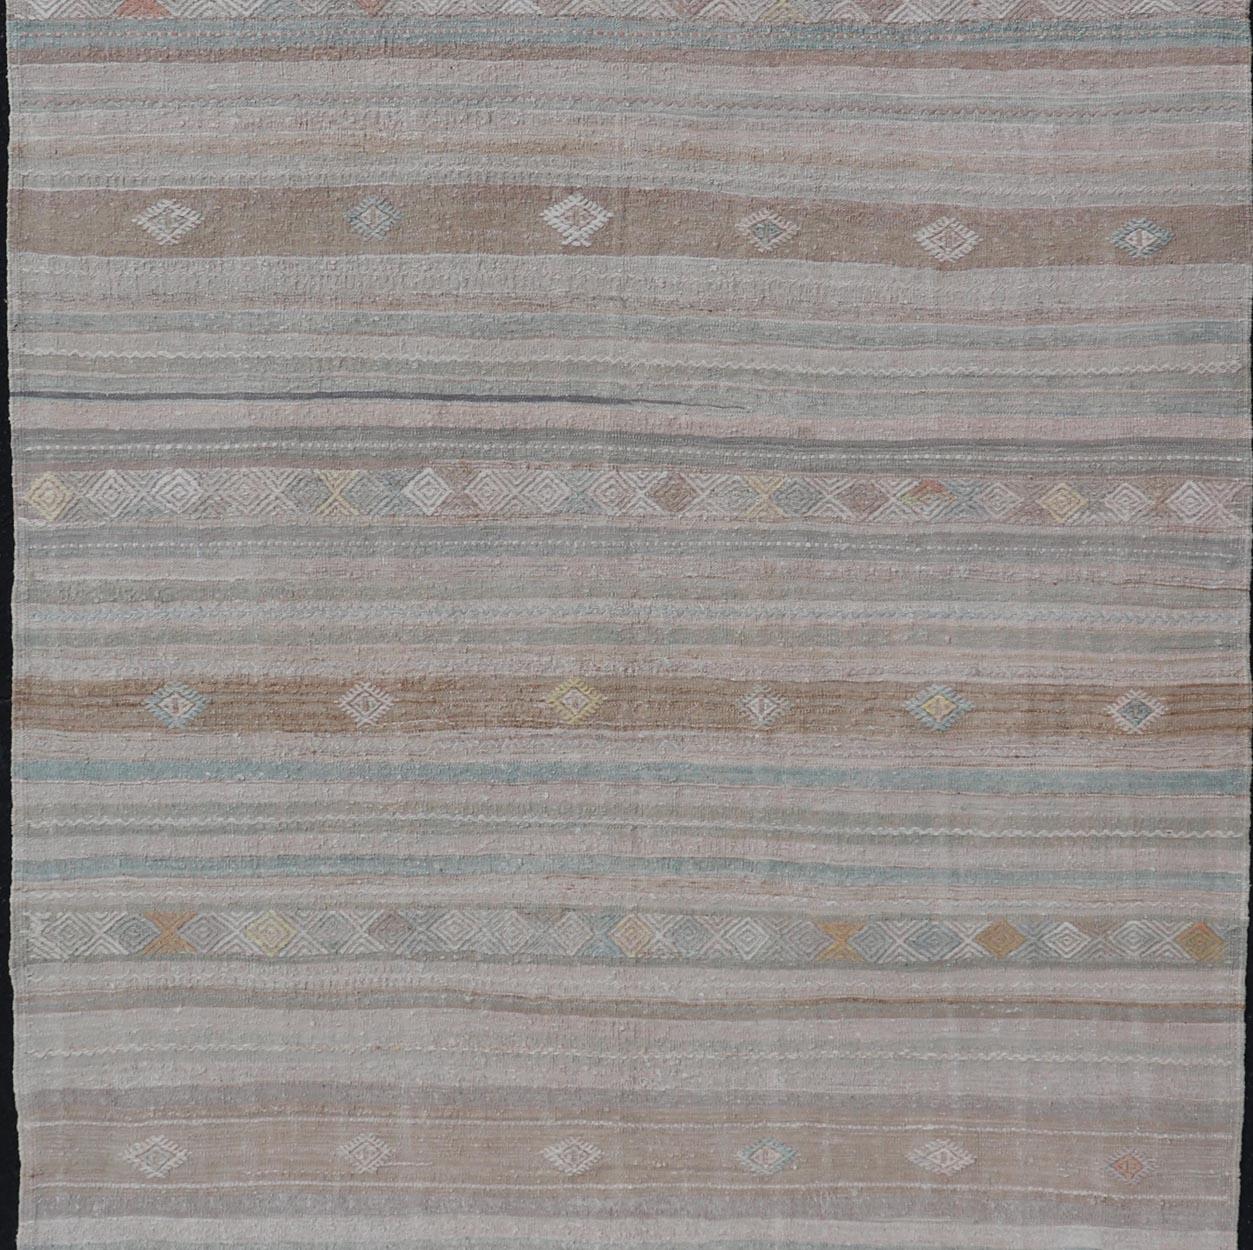 Turkish Flat-Weave Kilim with Embroideries in Taupe, Tan, Light Green, and Grey For Sale 3